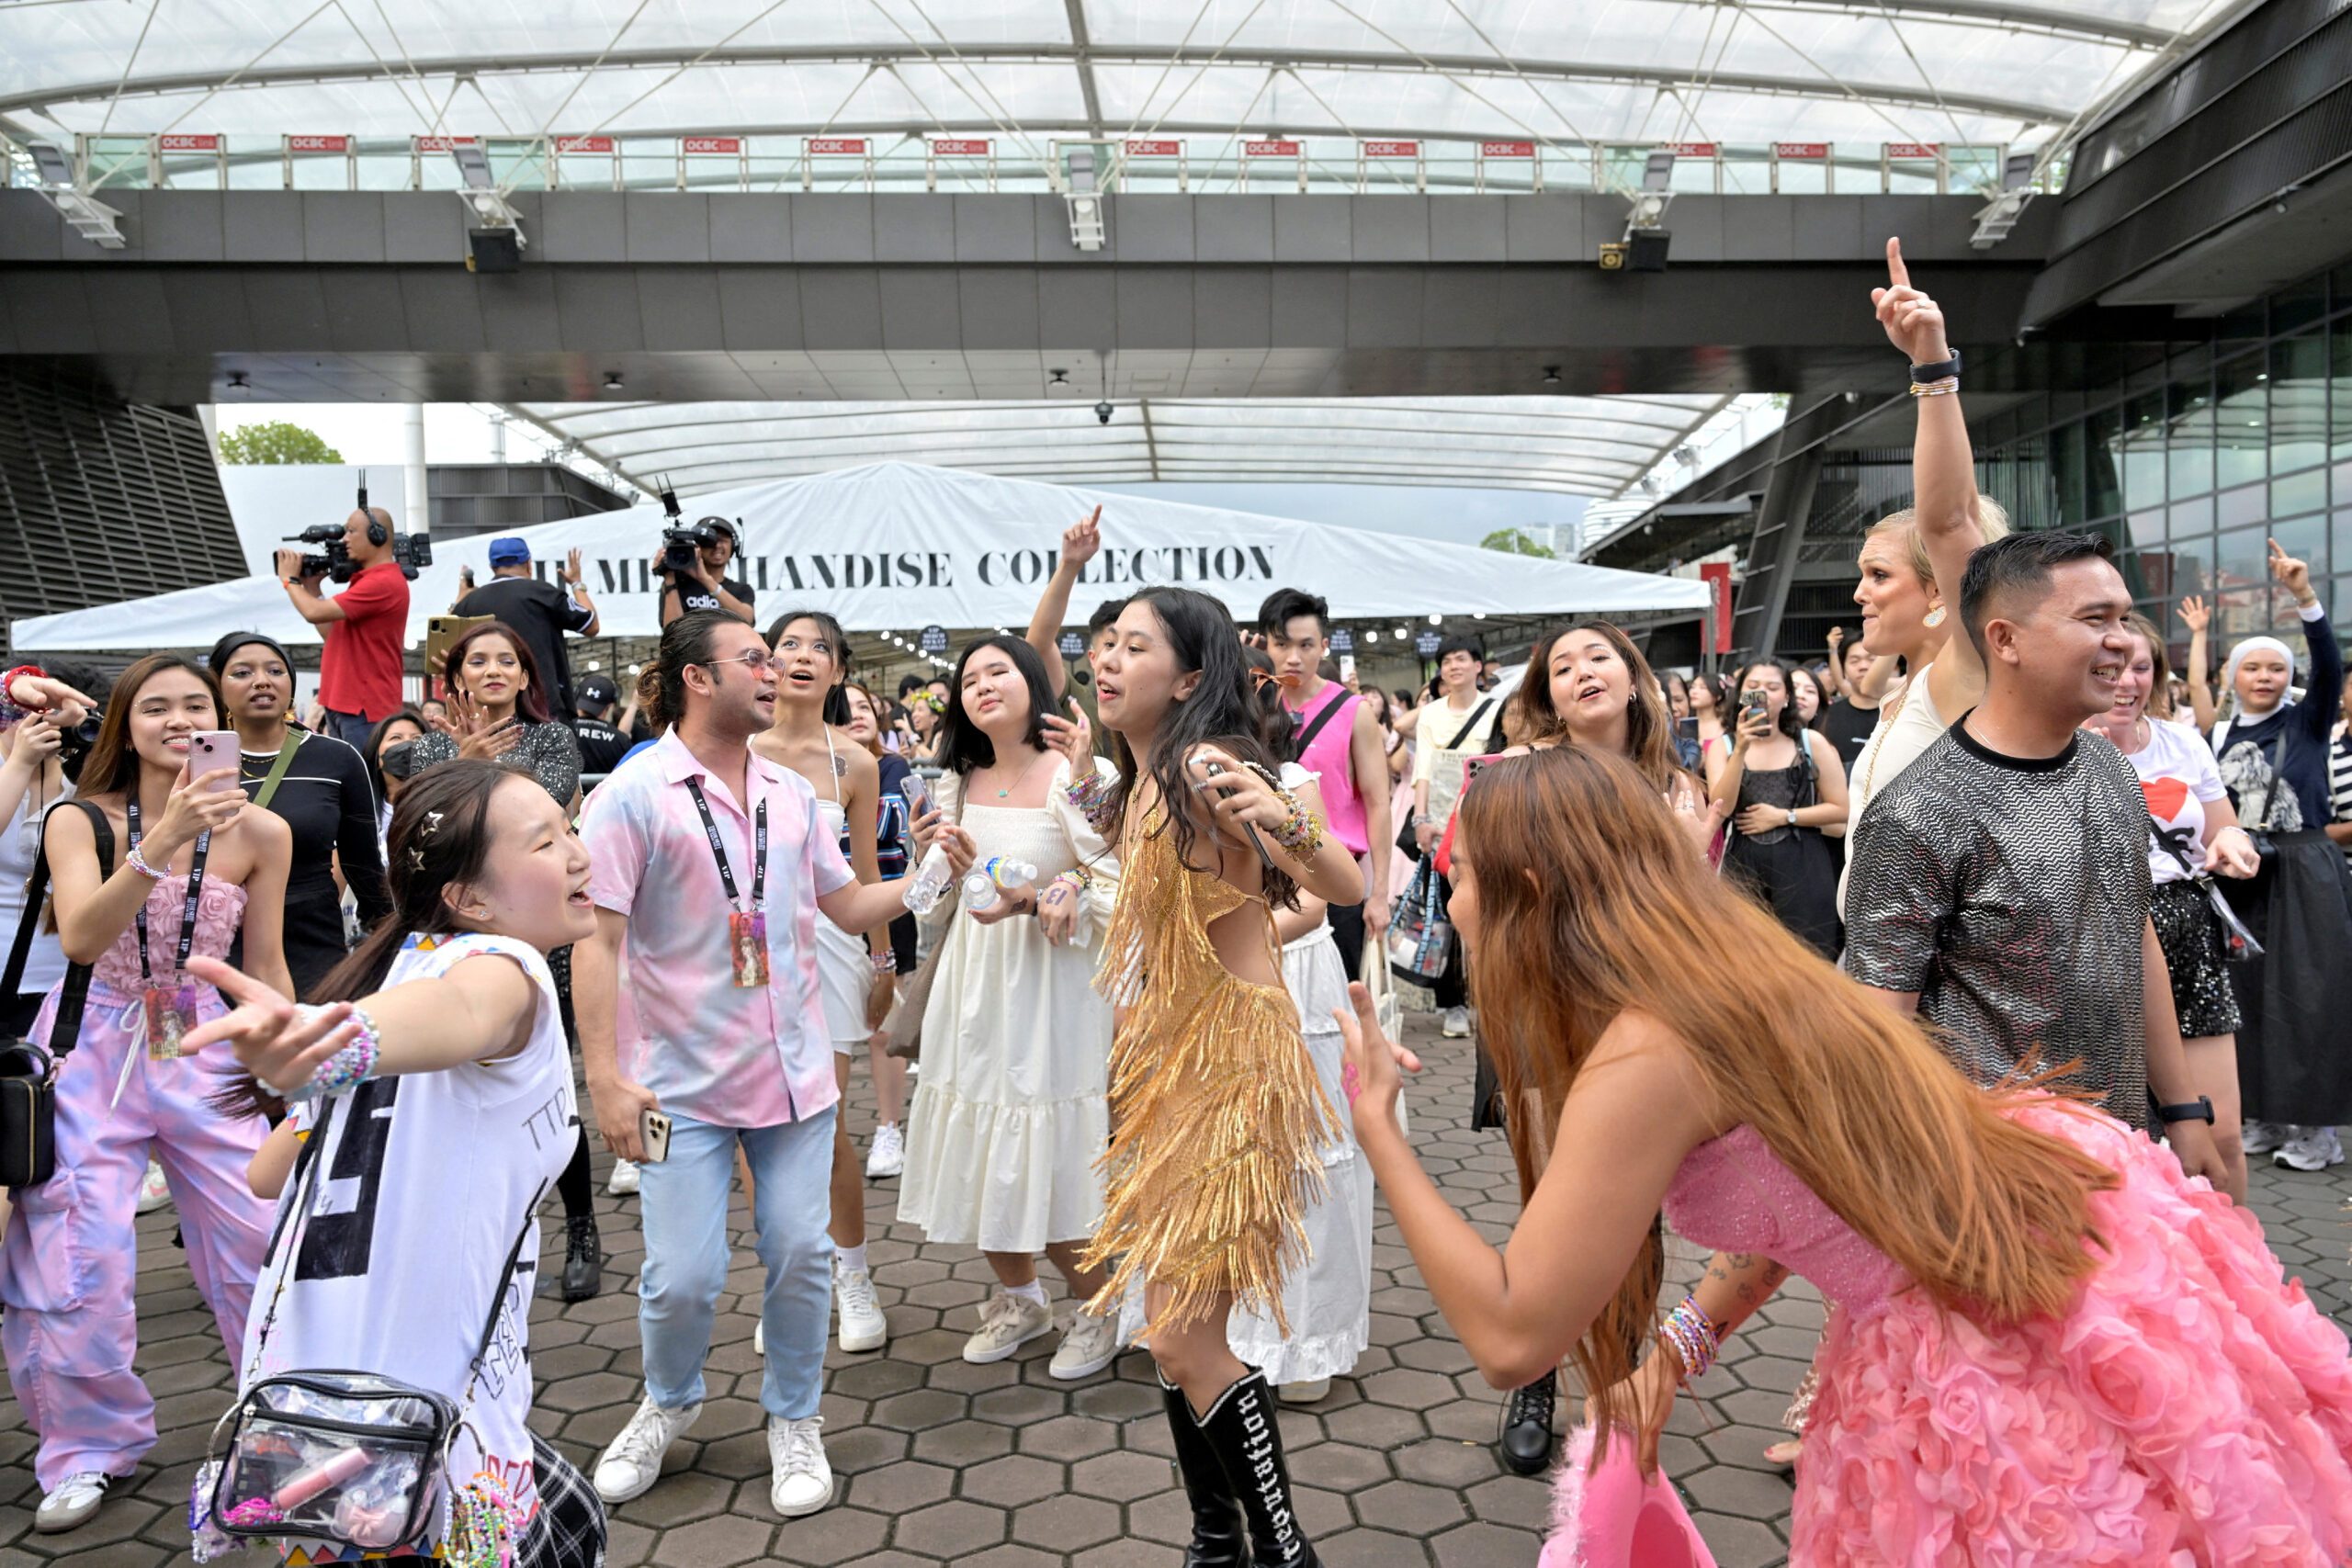 Swifties make pricey pilgrimage to star’s only Southeast Asian stop